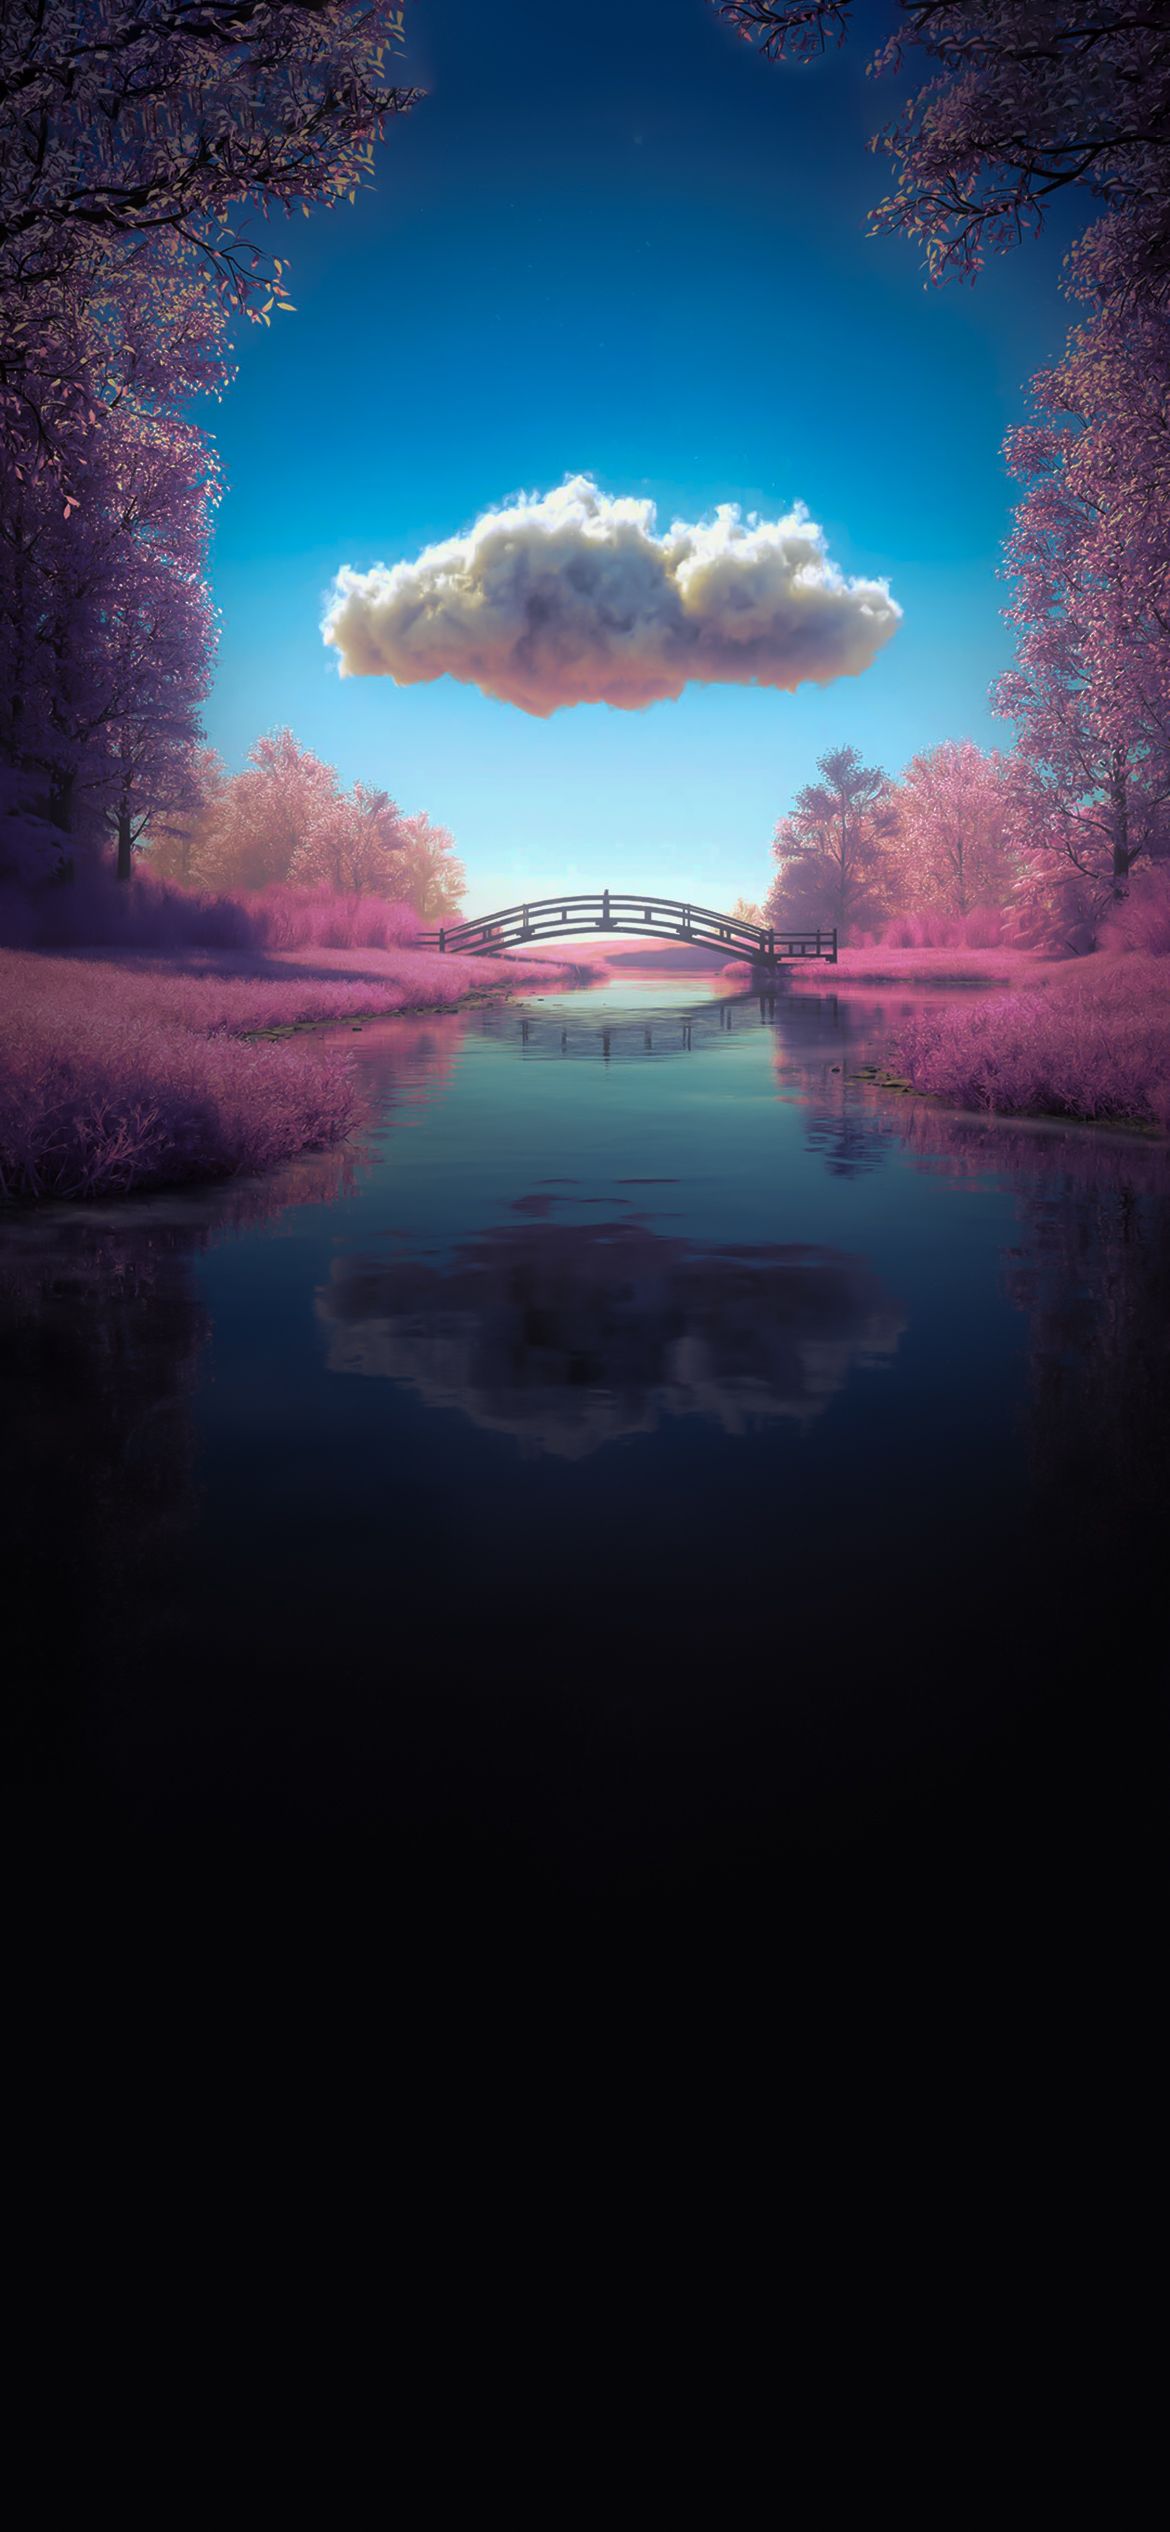 Iphone wallpaper of a beautiful scenery with a cloud in the sky - IPhone, landscape, HD, lake